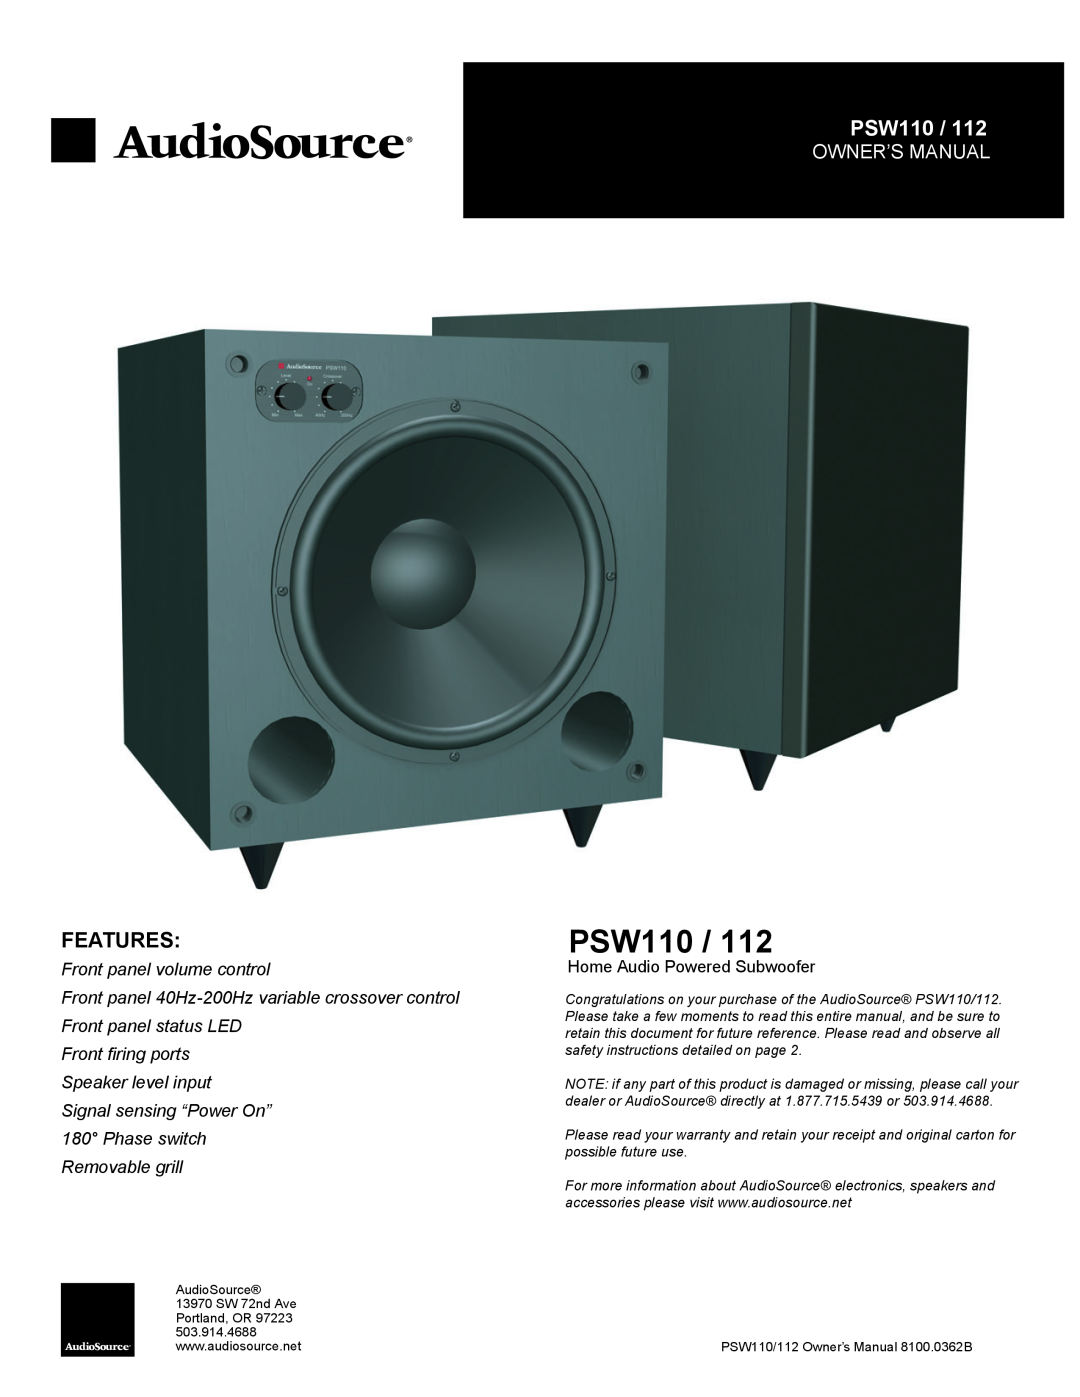 AudioSource AudioSource Home Audio Powered Subwoofer, PSW110/112 owner manual Features 